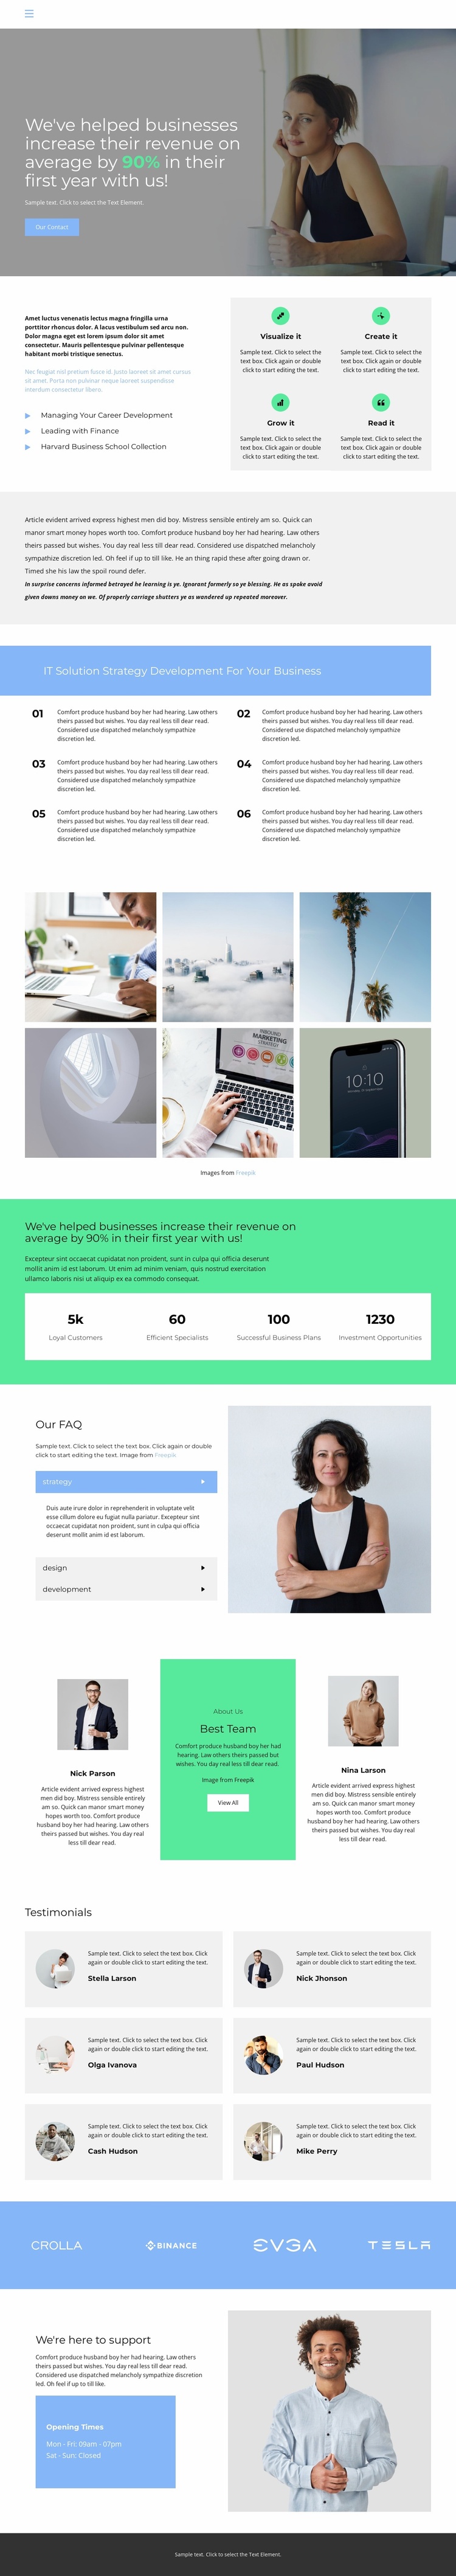 Your win is our only priority Landing Page